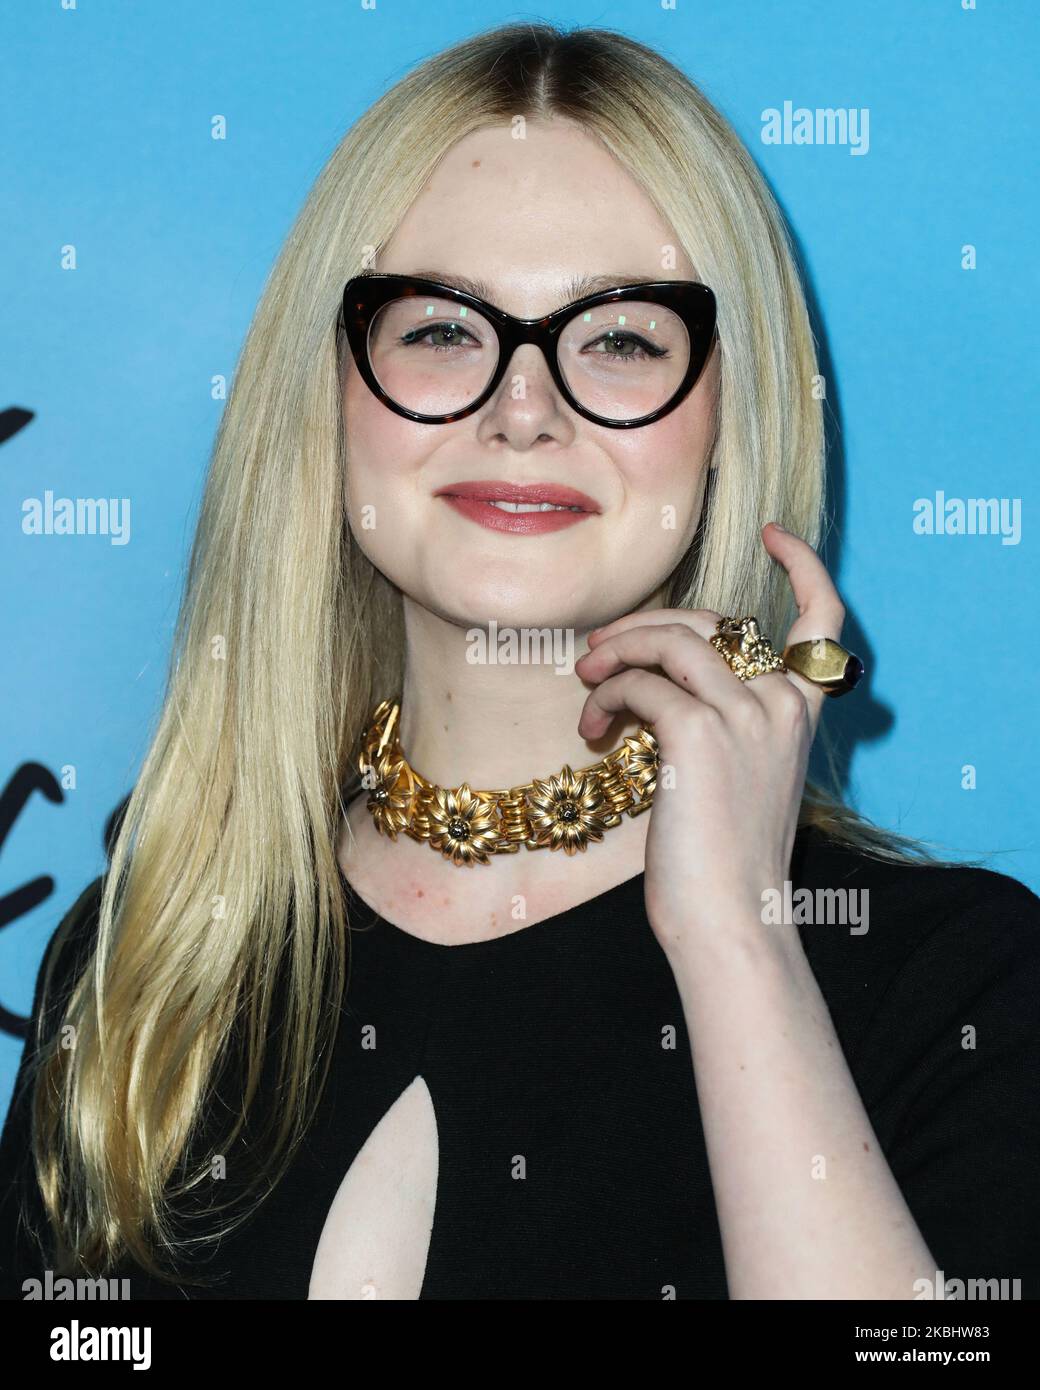 HOLLYWOOD, LOS ANGELES, CALIFORNIA, USA - FEBRUARY 24: Actress Elle Fanning wearing Gucci arrives at the Los Angeles Special Screening Of Netflix's 'All The Bright Places' held at ArcLight Hollywood on February 24, 2020 in Hollywood, Los Angeles, California, United States. (Photo by Xavier Collin/Image Press Agency/NurPhoto) Stock Photo